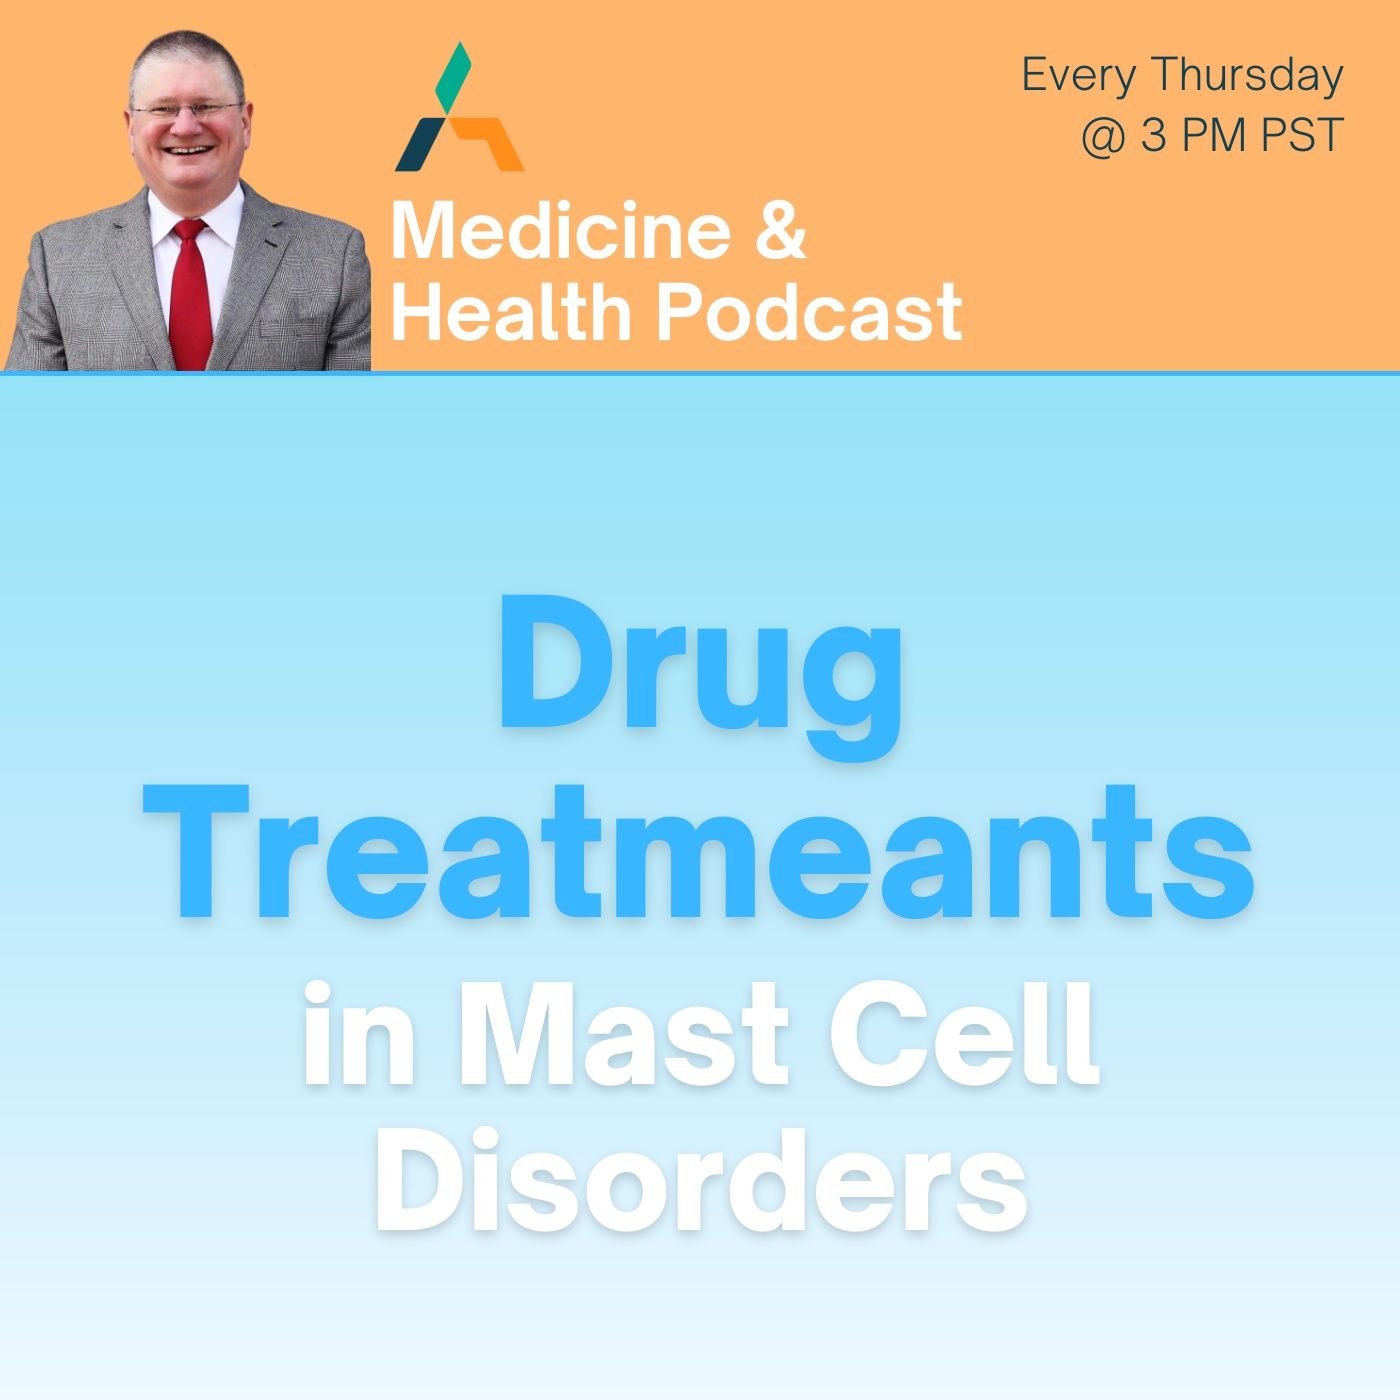 DRUG TREATMENTS IN MAST CELL DISORDERS